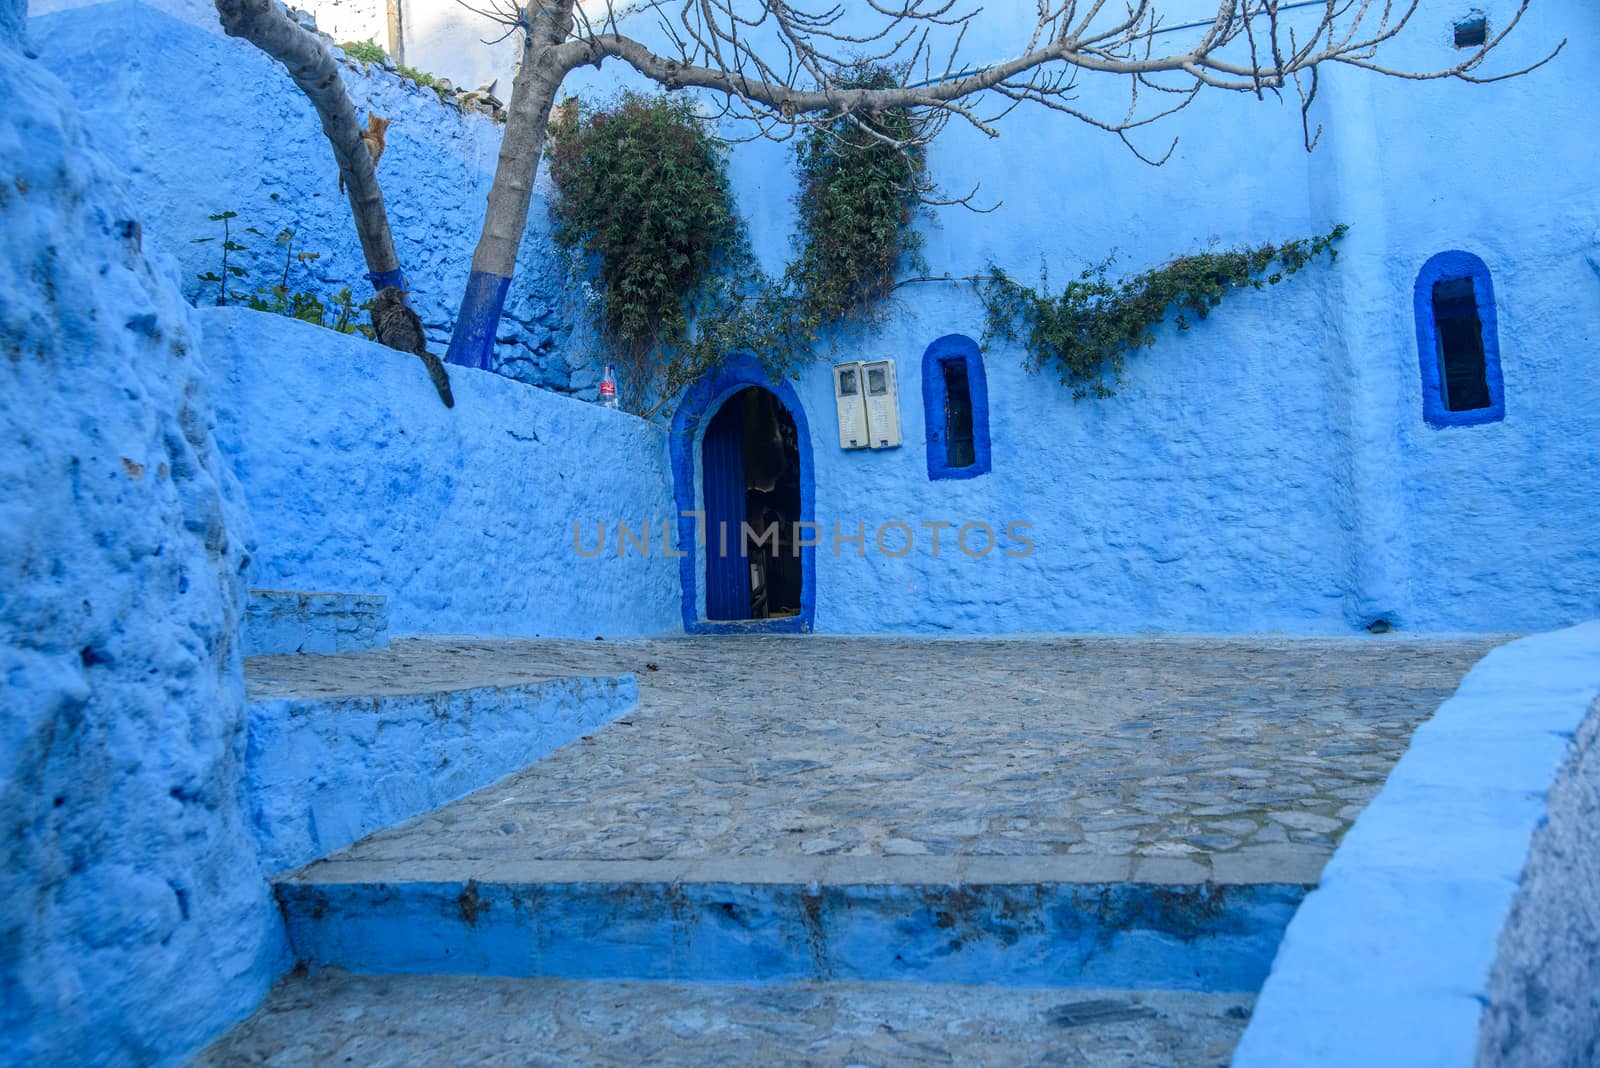 Chefchaouen, the blue city in the Morocco. by johnnychaos